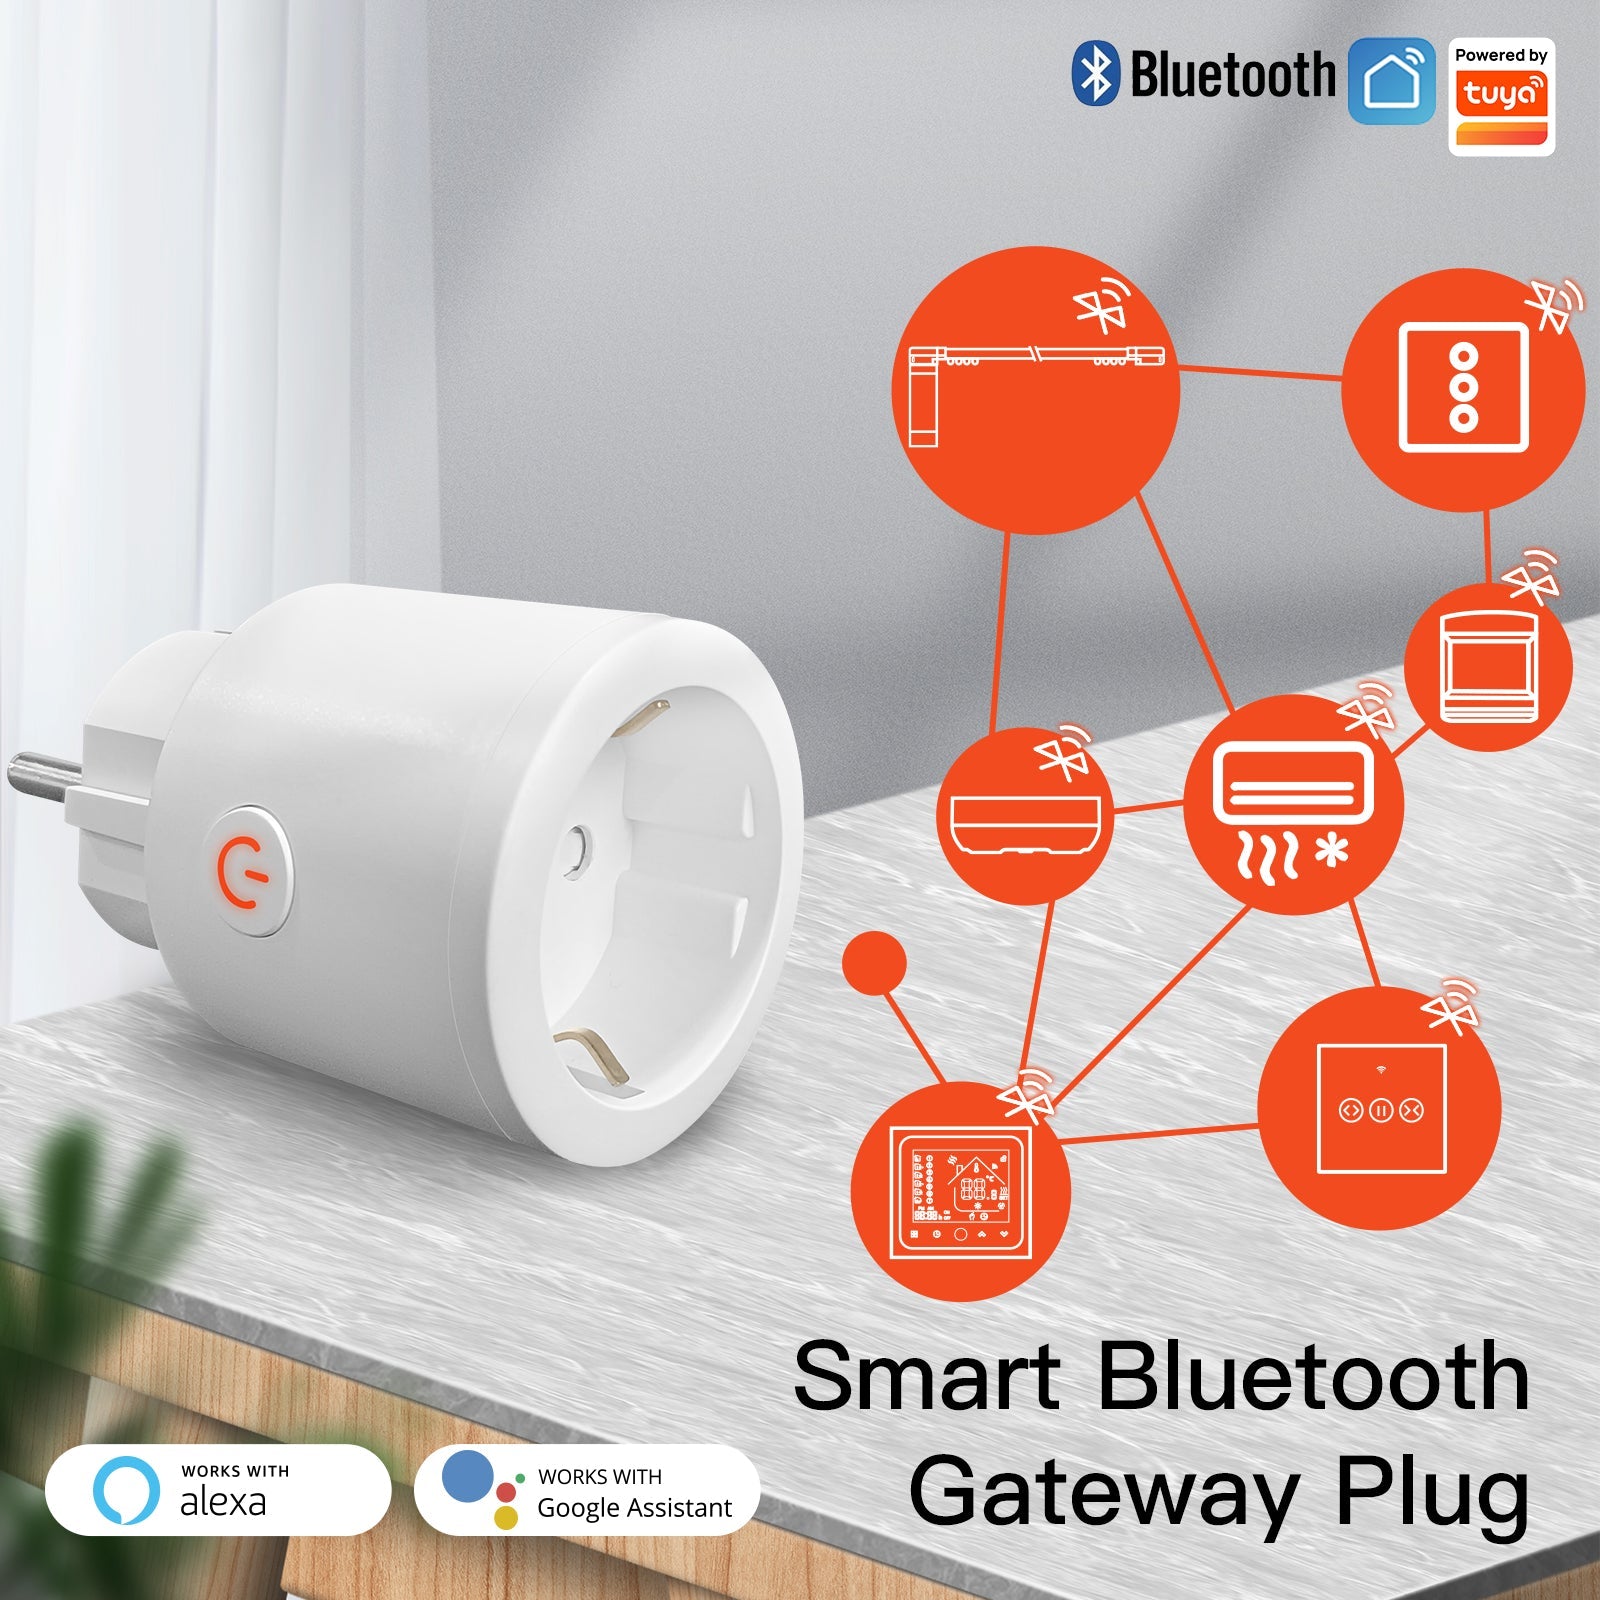 Bem Bluetooth Speaker Plugs Straight Into A Power Outlet